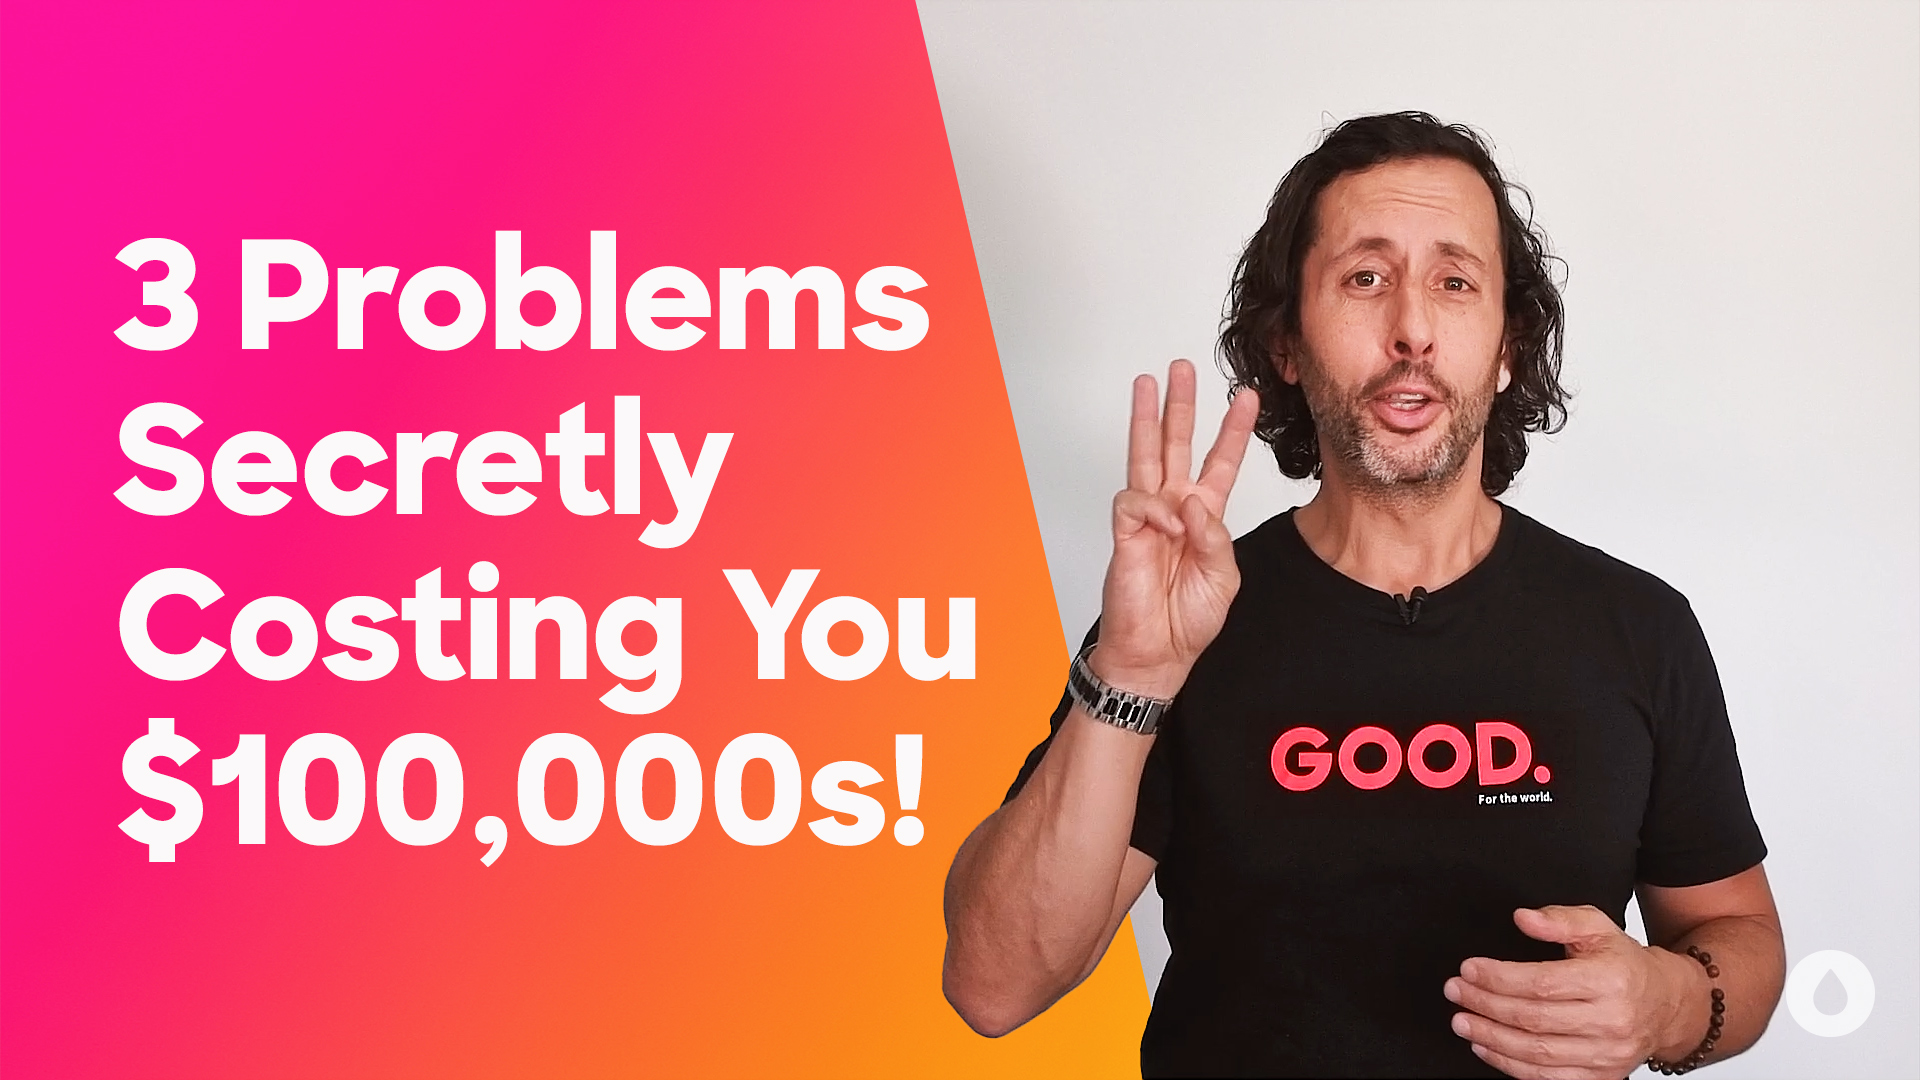 3 Problems Secretly Costing You $100,000s